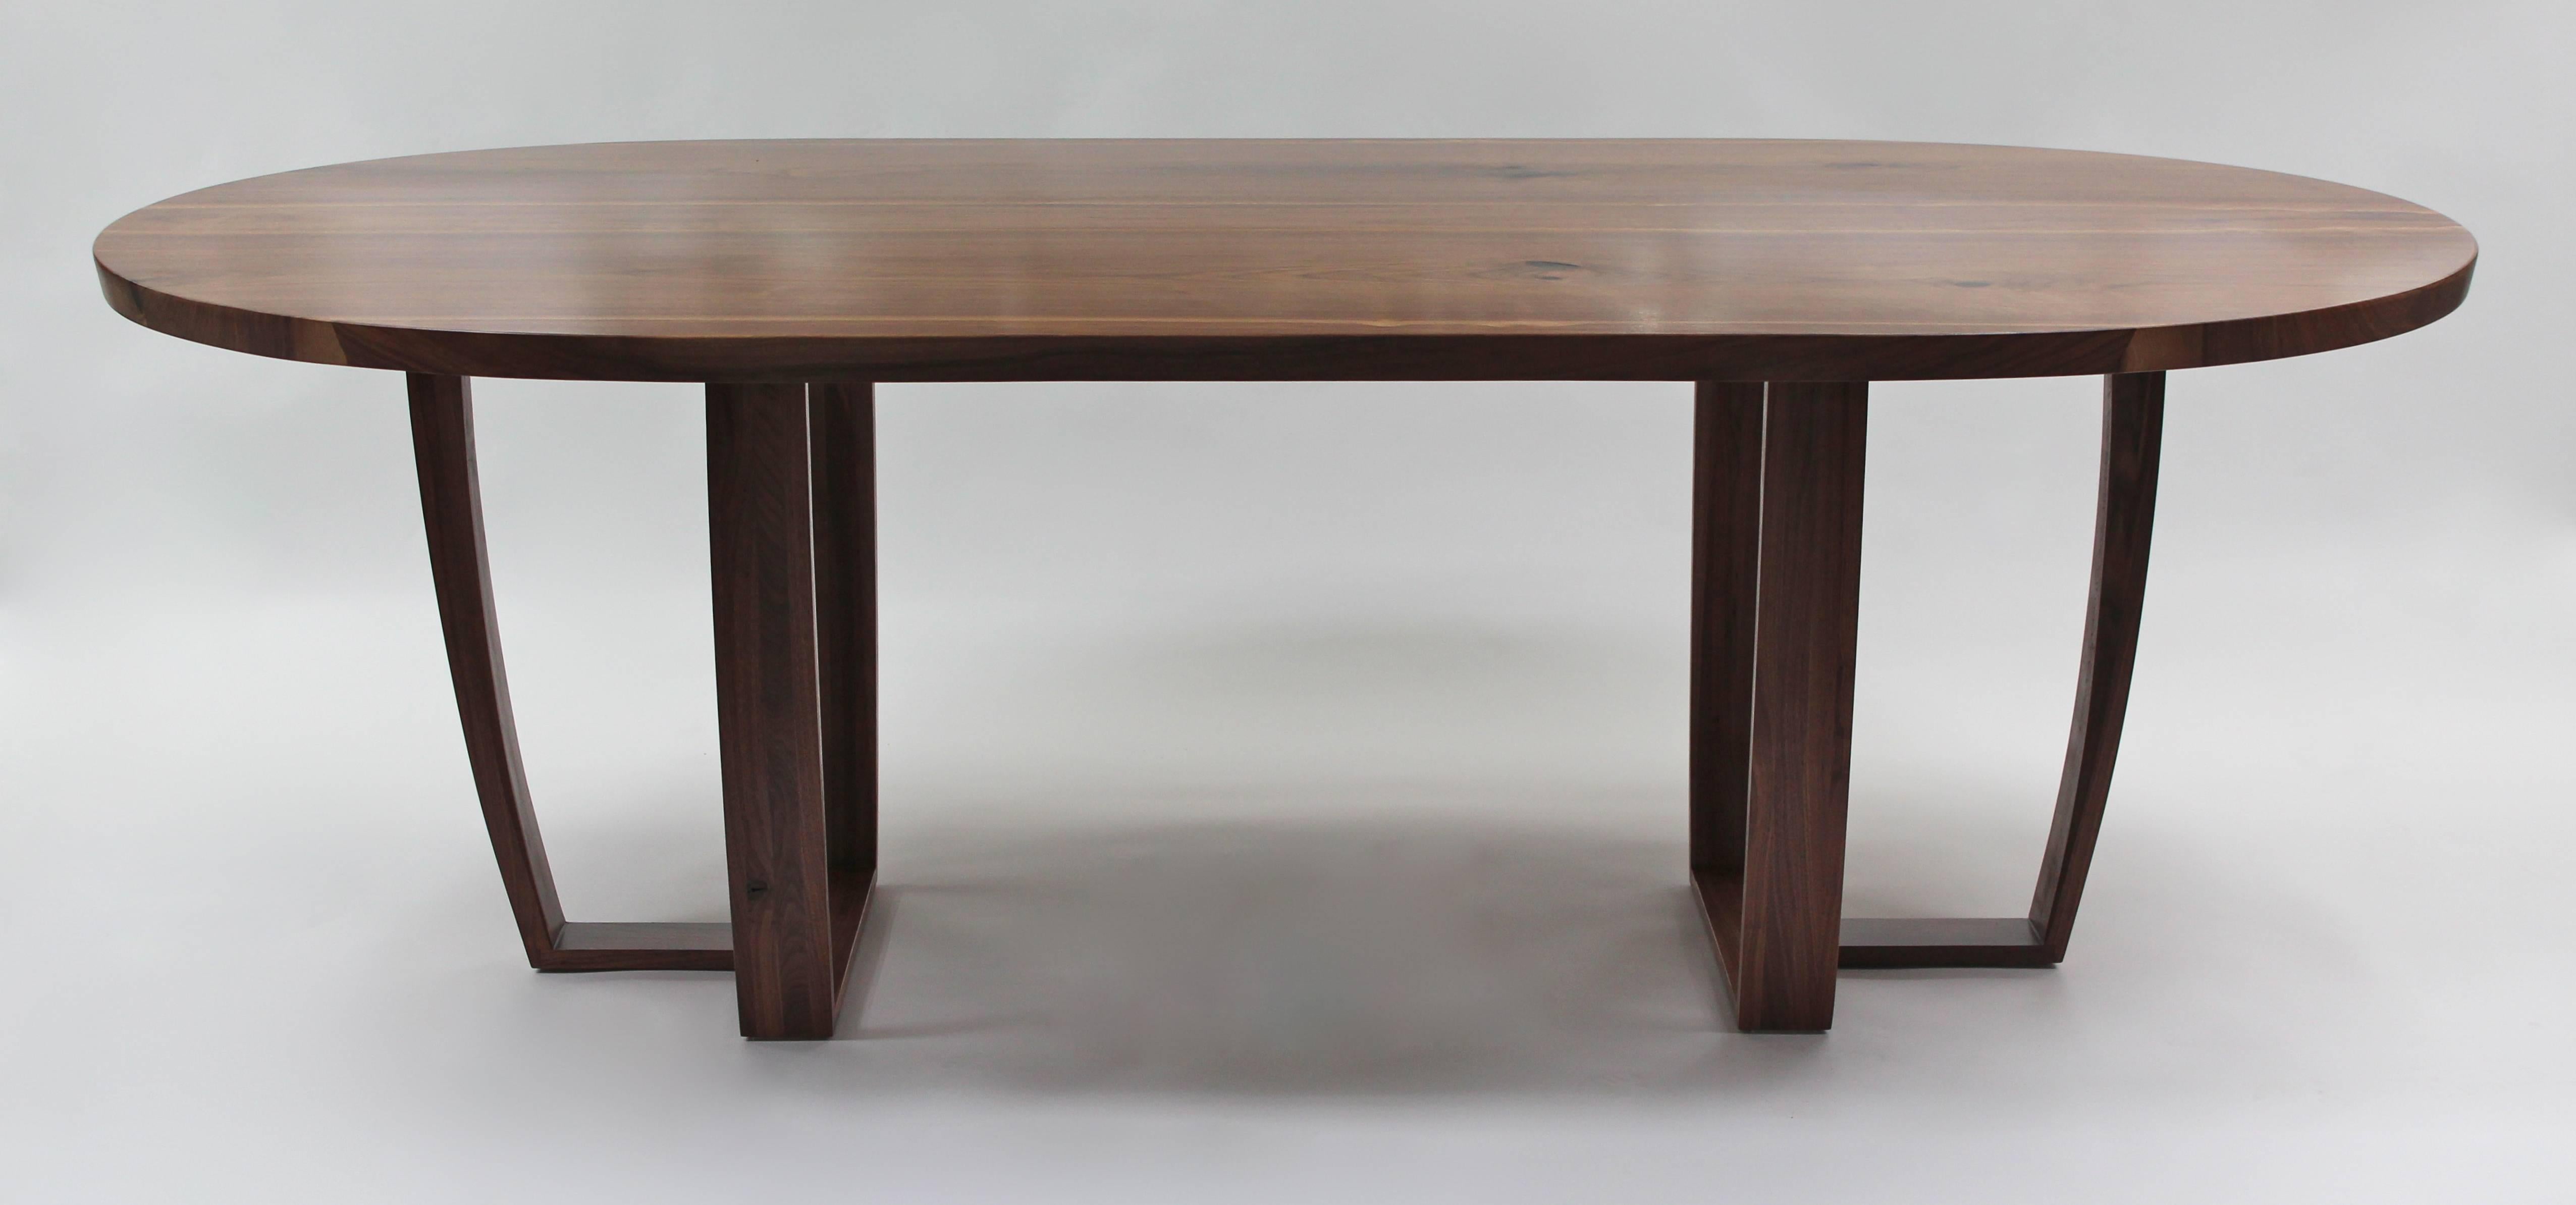 Carved Oval Dining Table in Bookmatched Walnut by Jonathan Field, bespoke sizes.